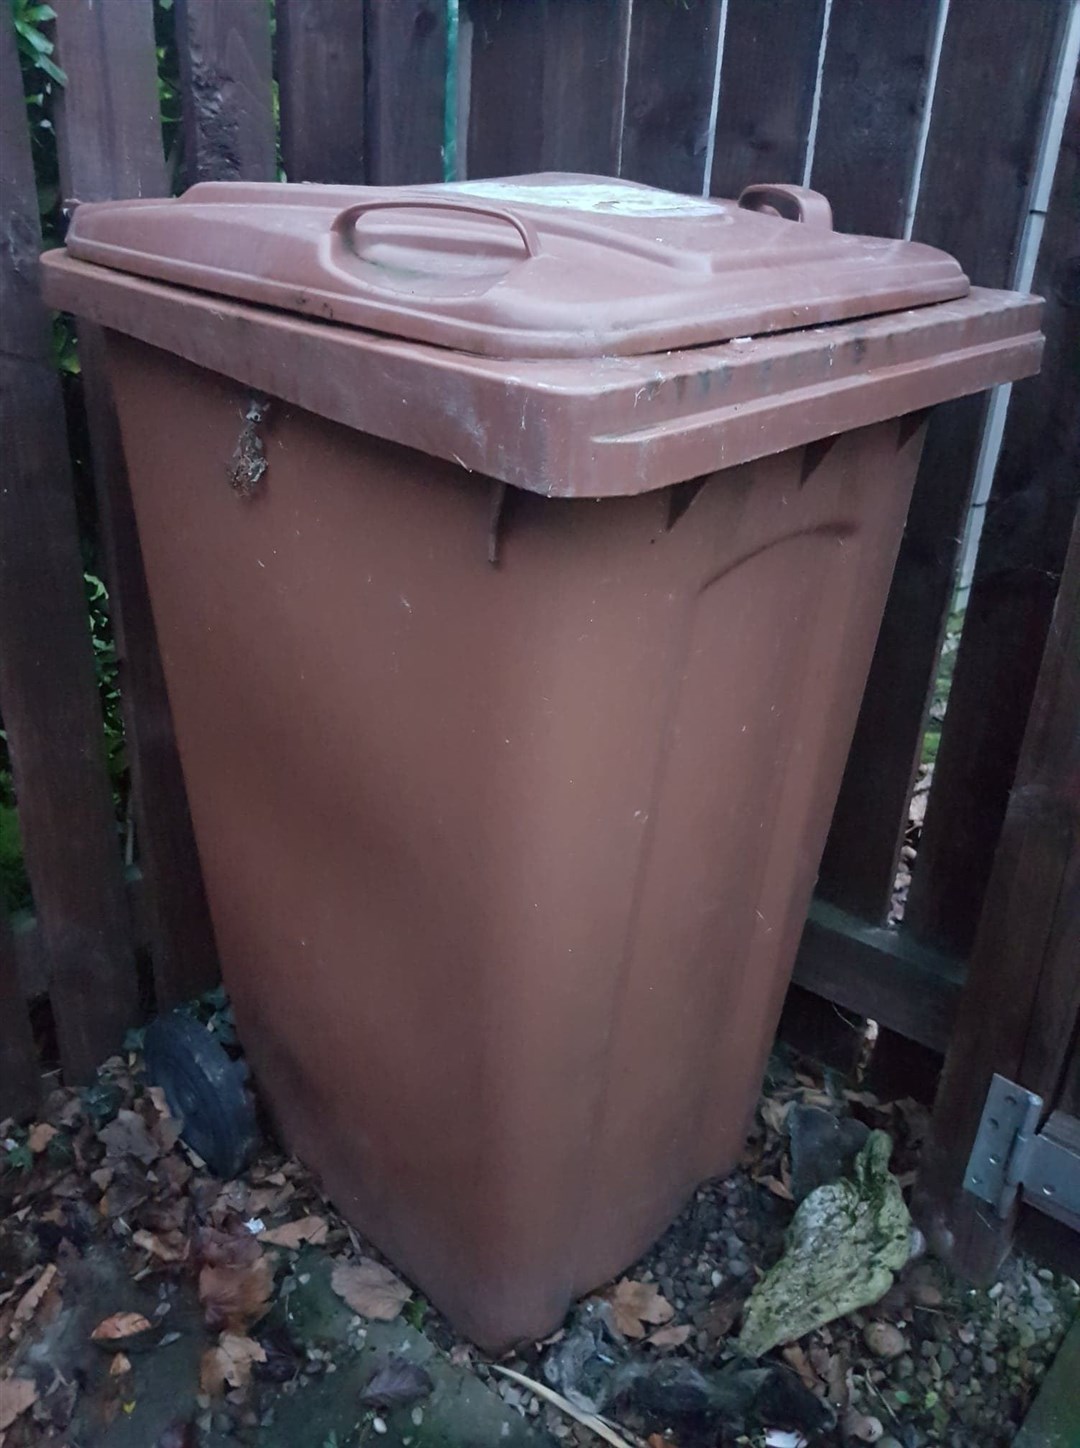 Brown bin permits are available once more